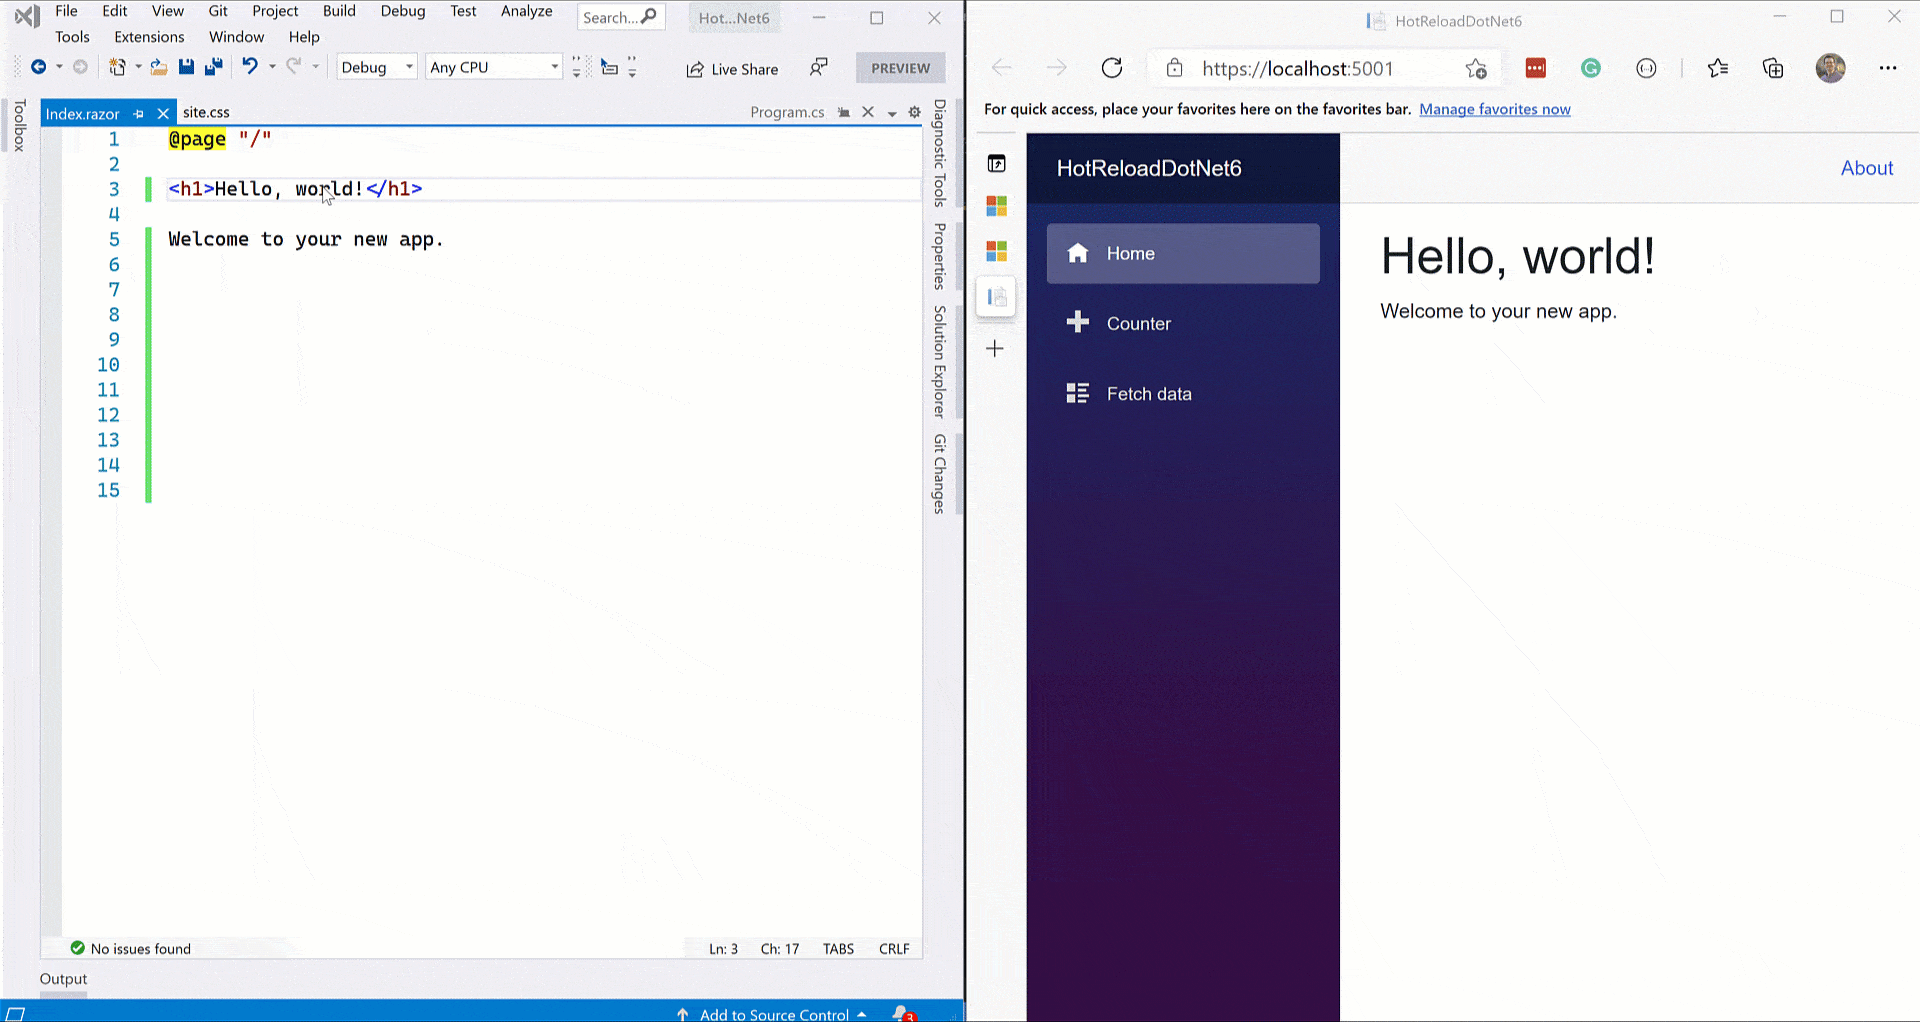 Change the heading text to see hot reload in action - from "Hello, world!" to "Hello, friends!" The change is typed into the editor in a window on the left, and the window on the right shows localhost:5001, which almost immediately shows a "Updated the page" message and the new header.